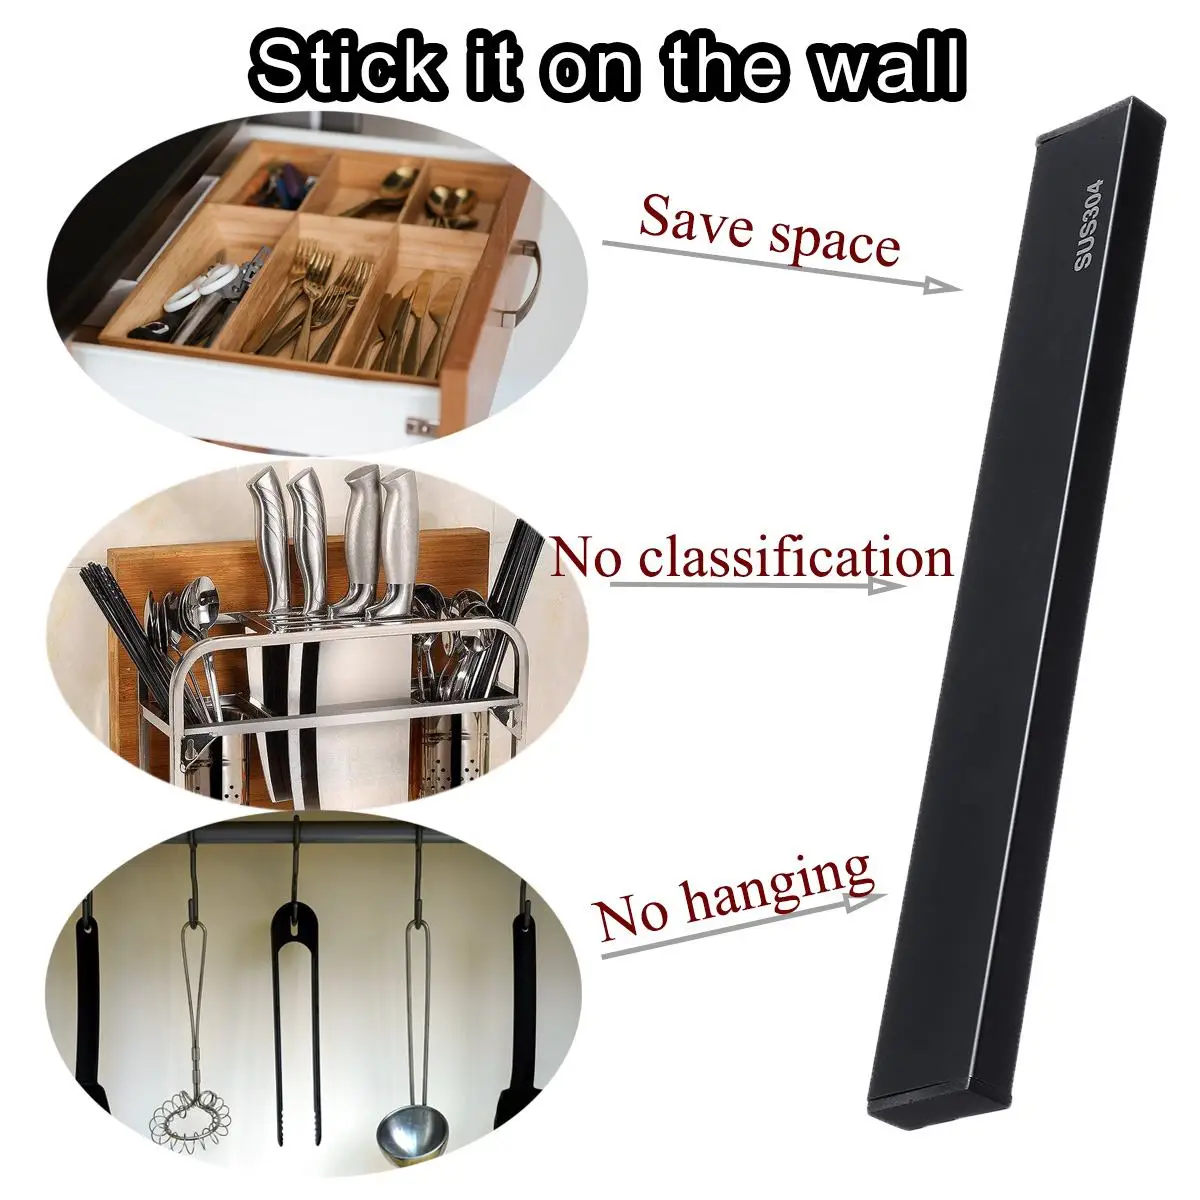 50cm Length Blocks Knife Holder Strong Magnetic Self-adhesive Wall Mounted Kitchen Magnet Bar Holder Display Rack Strip Stand